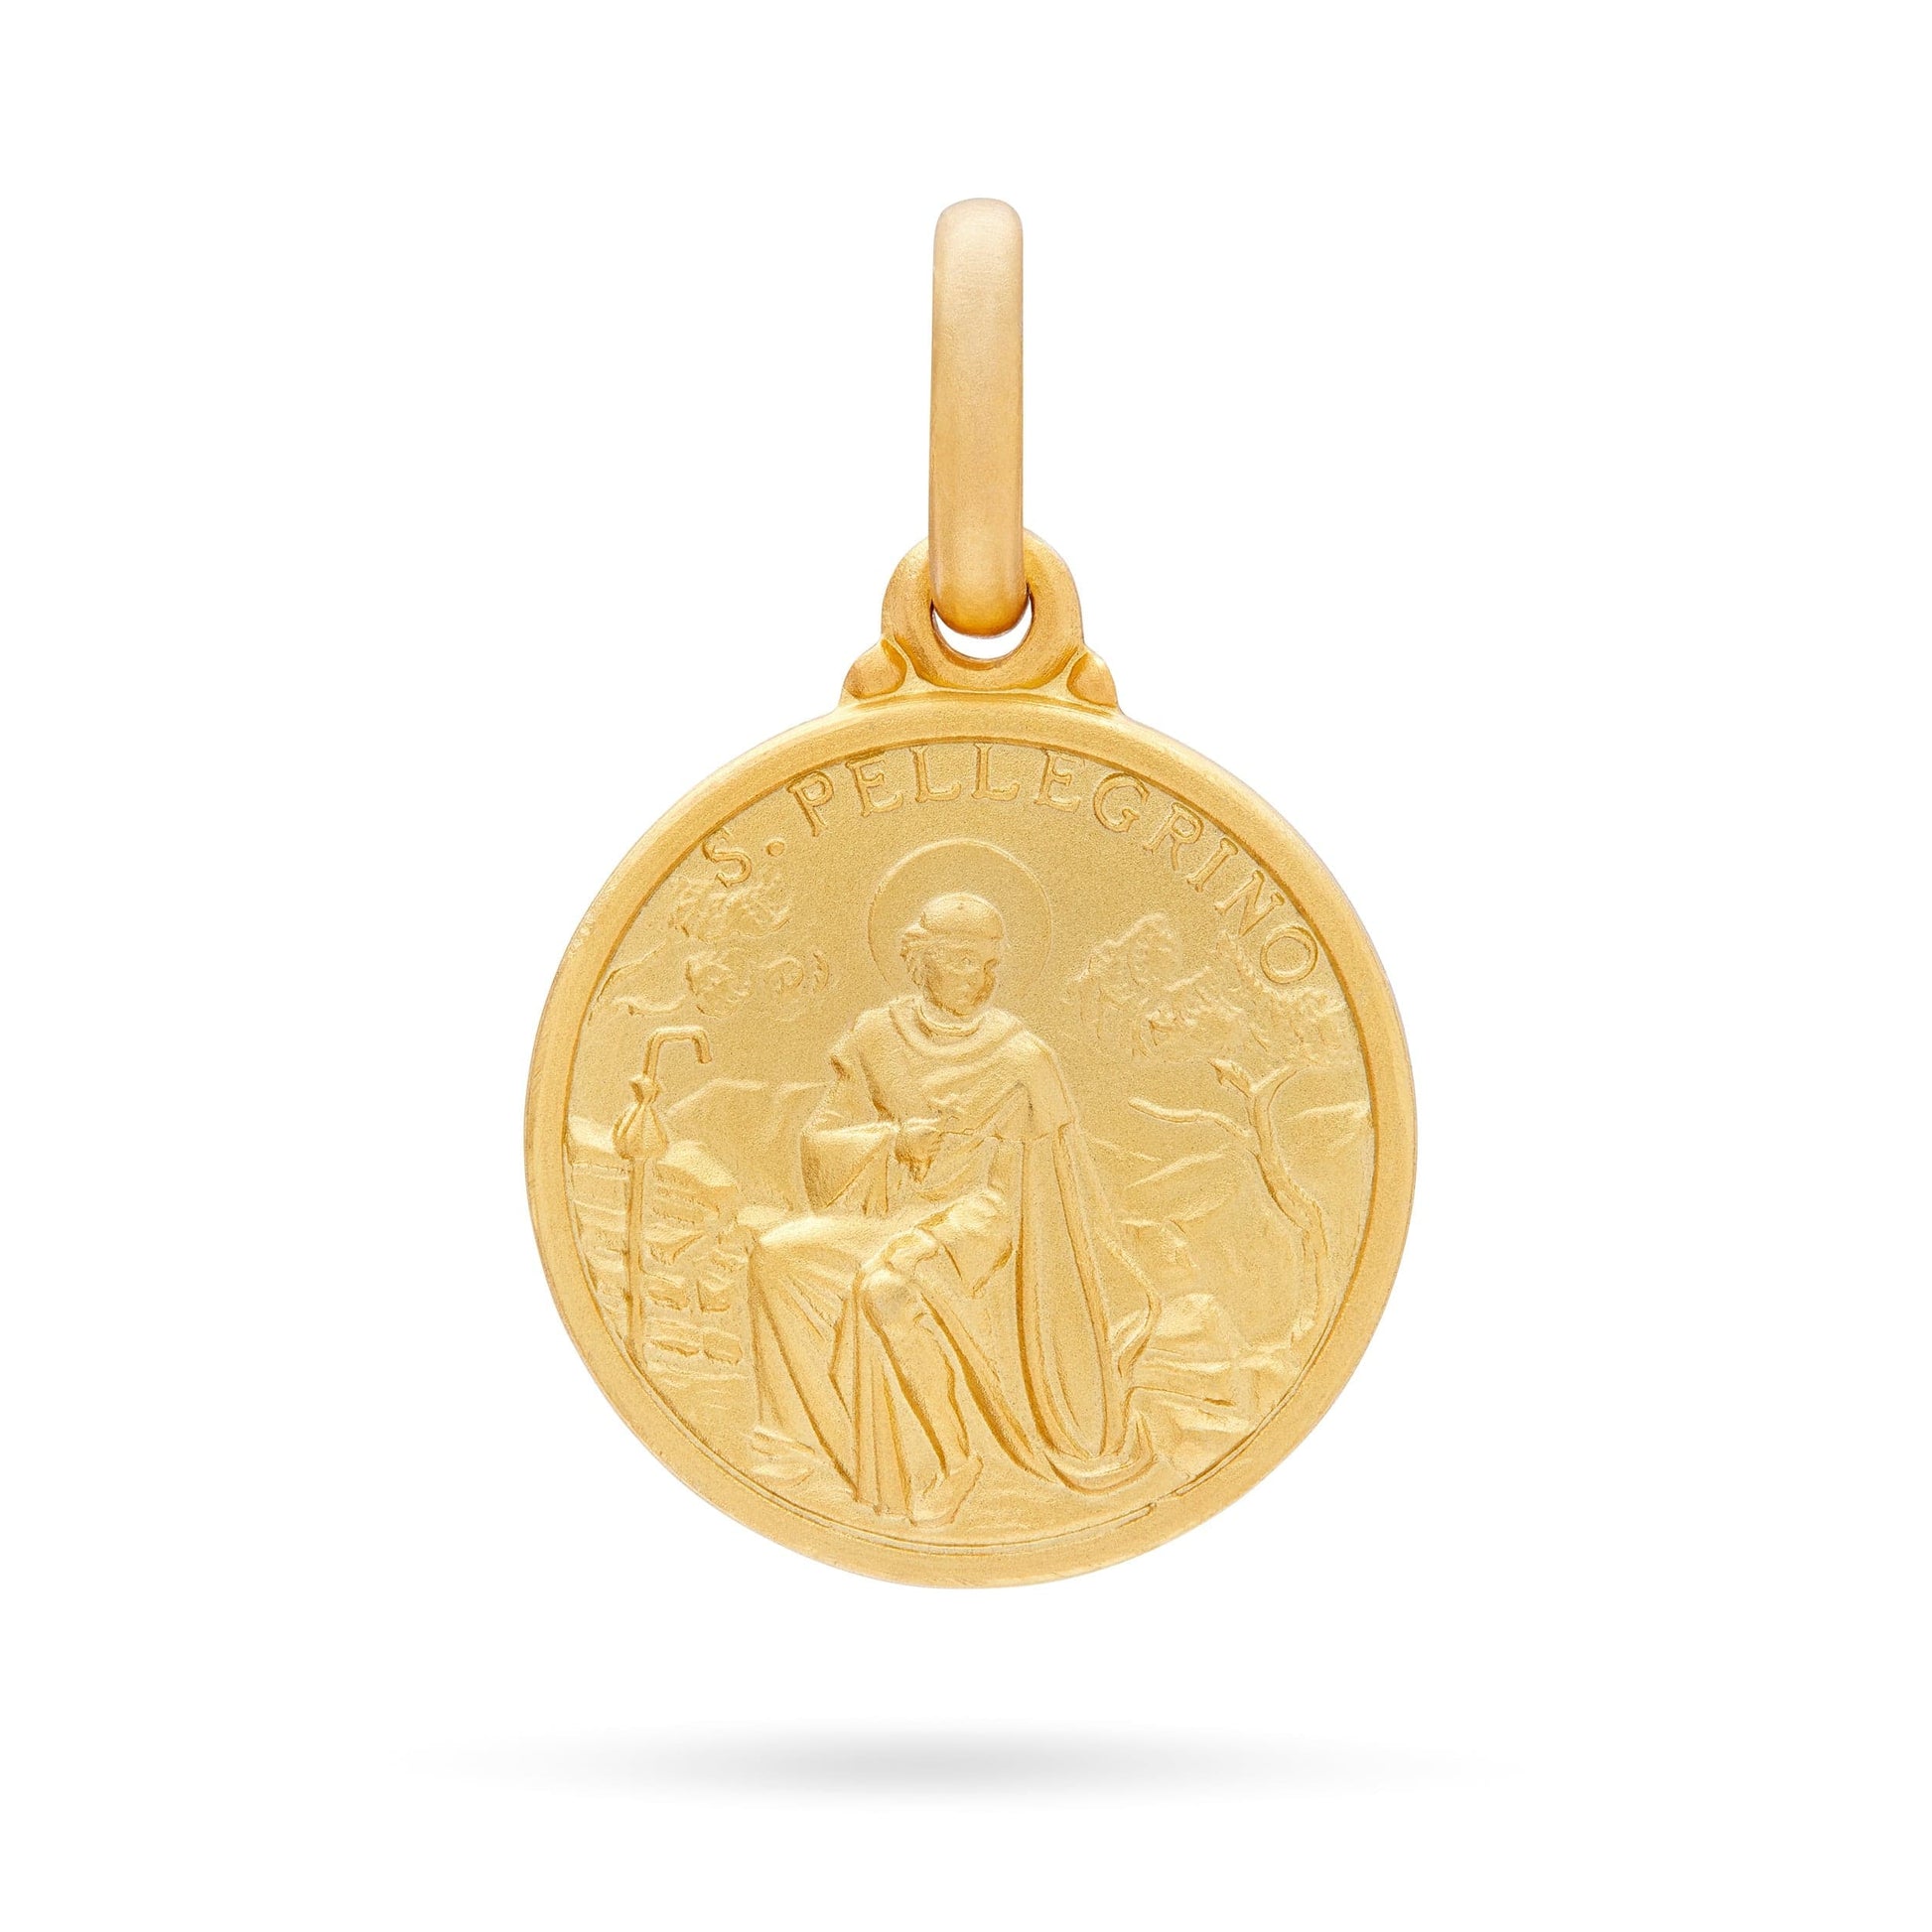 MONDO CATTOLICO Jewelry 14 mm (0.55 in) Gold medal of Saint Peregrine